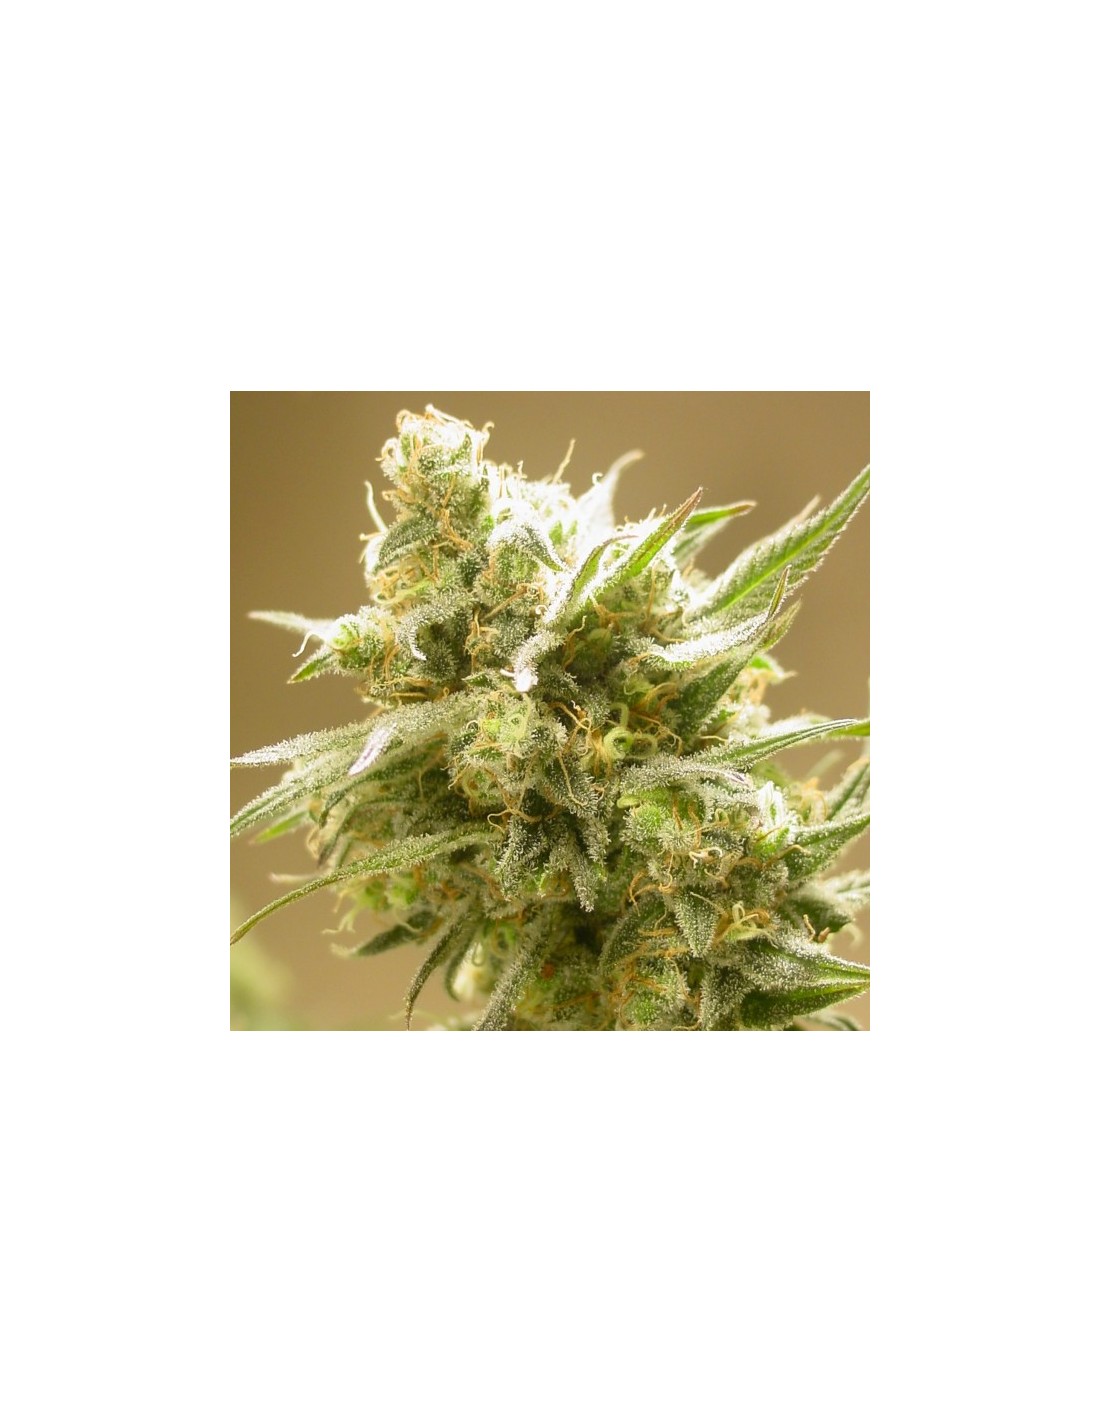 Buy Cinderella 99 BX from Mosca Seeds - Oaseeds